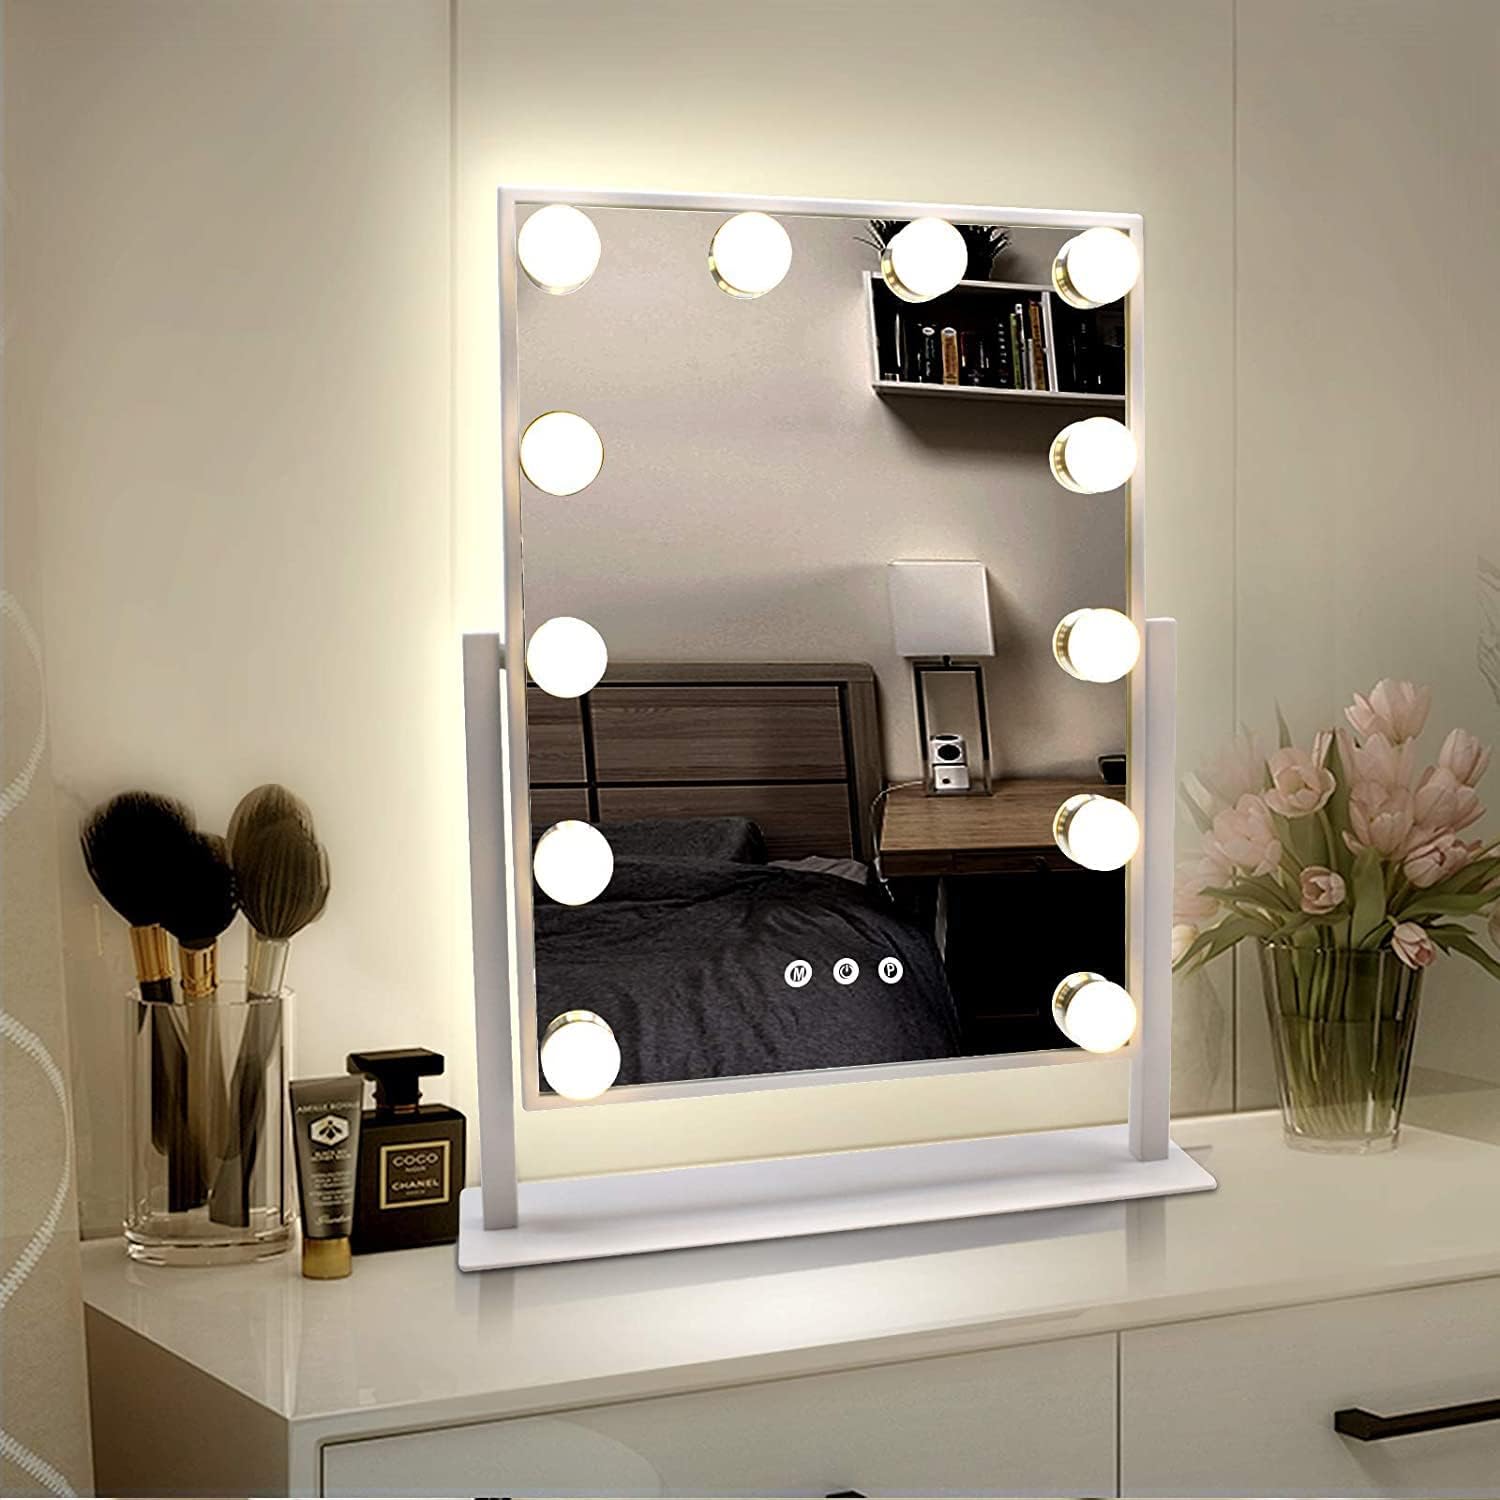 Where To Buy A Vanity Mirror With Lights